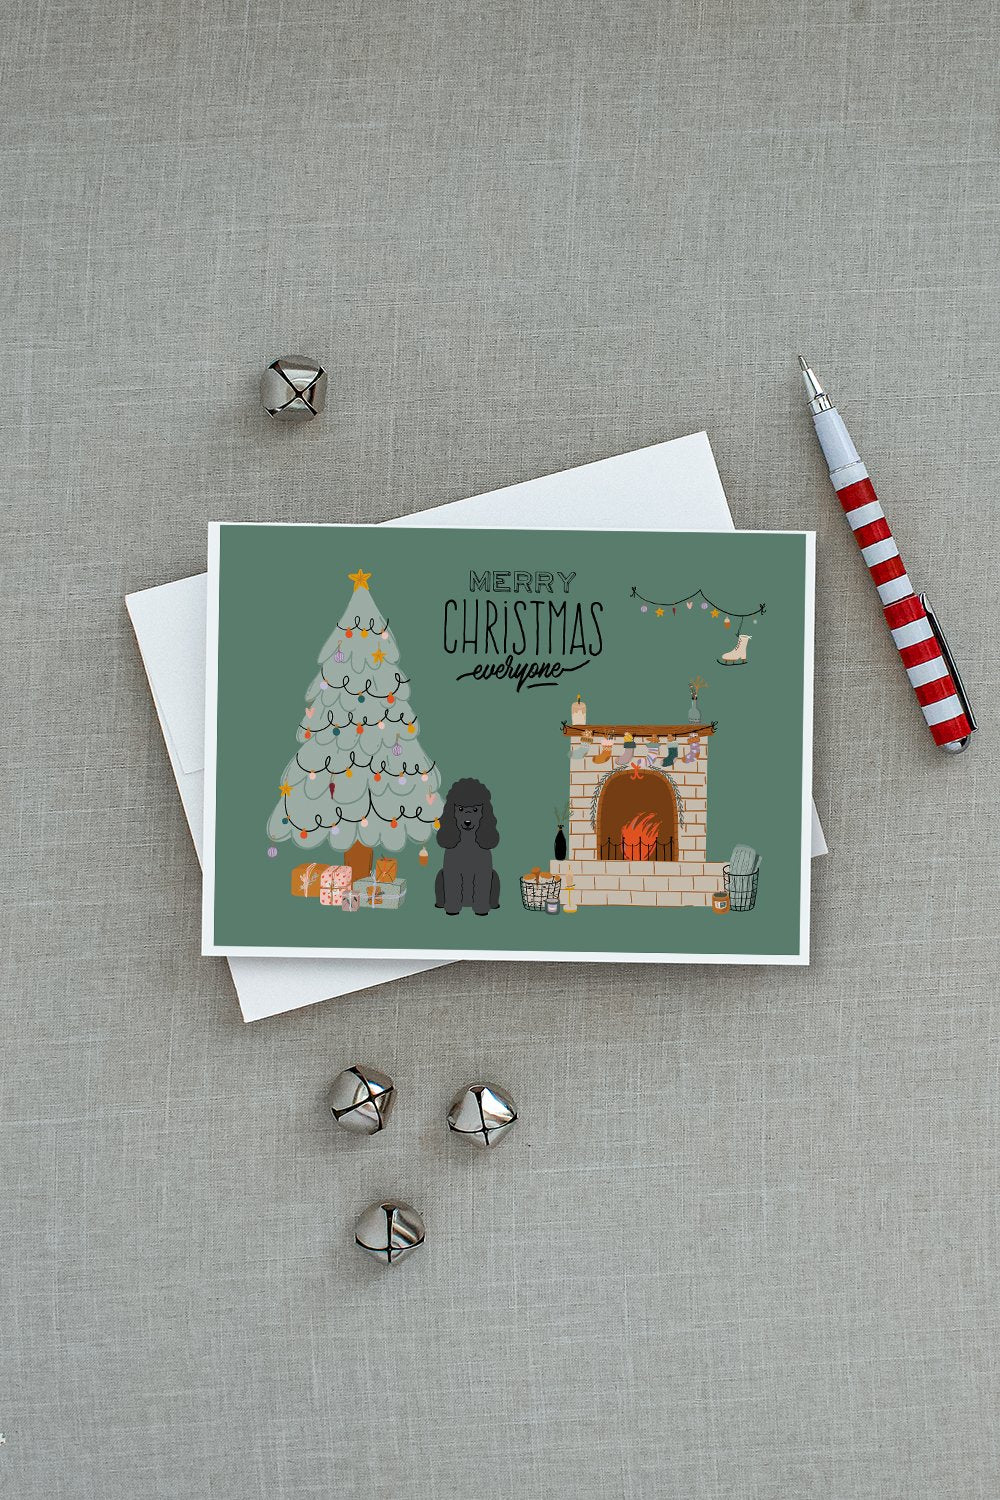 Black Poodle Christmas Everyone Greeting Cards and Envelopes Pack of 8 - the-store.com